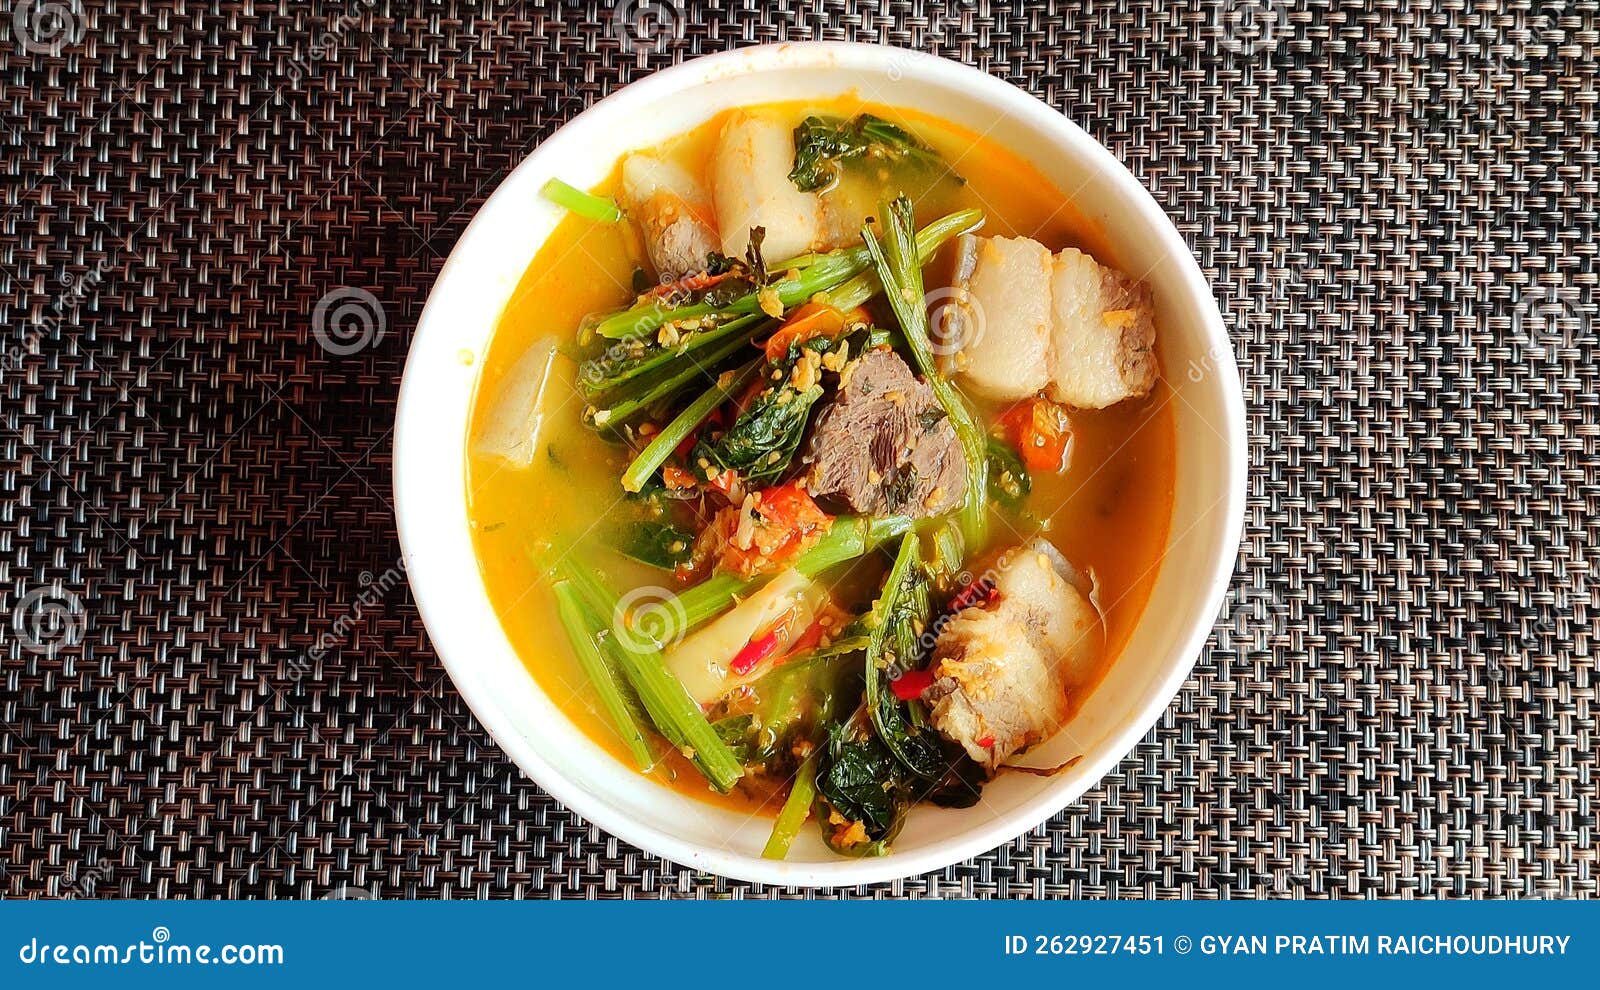 Assamese Style Boil Pork Curry Stock Image - Image of plate, meal ...